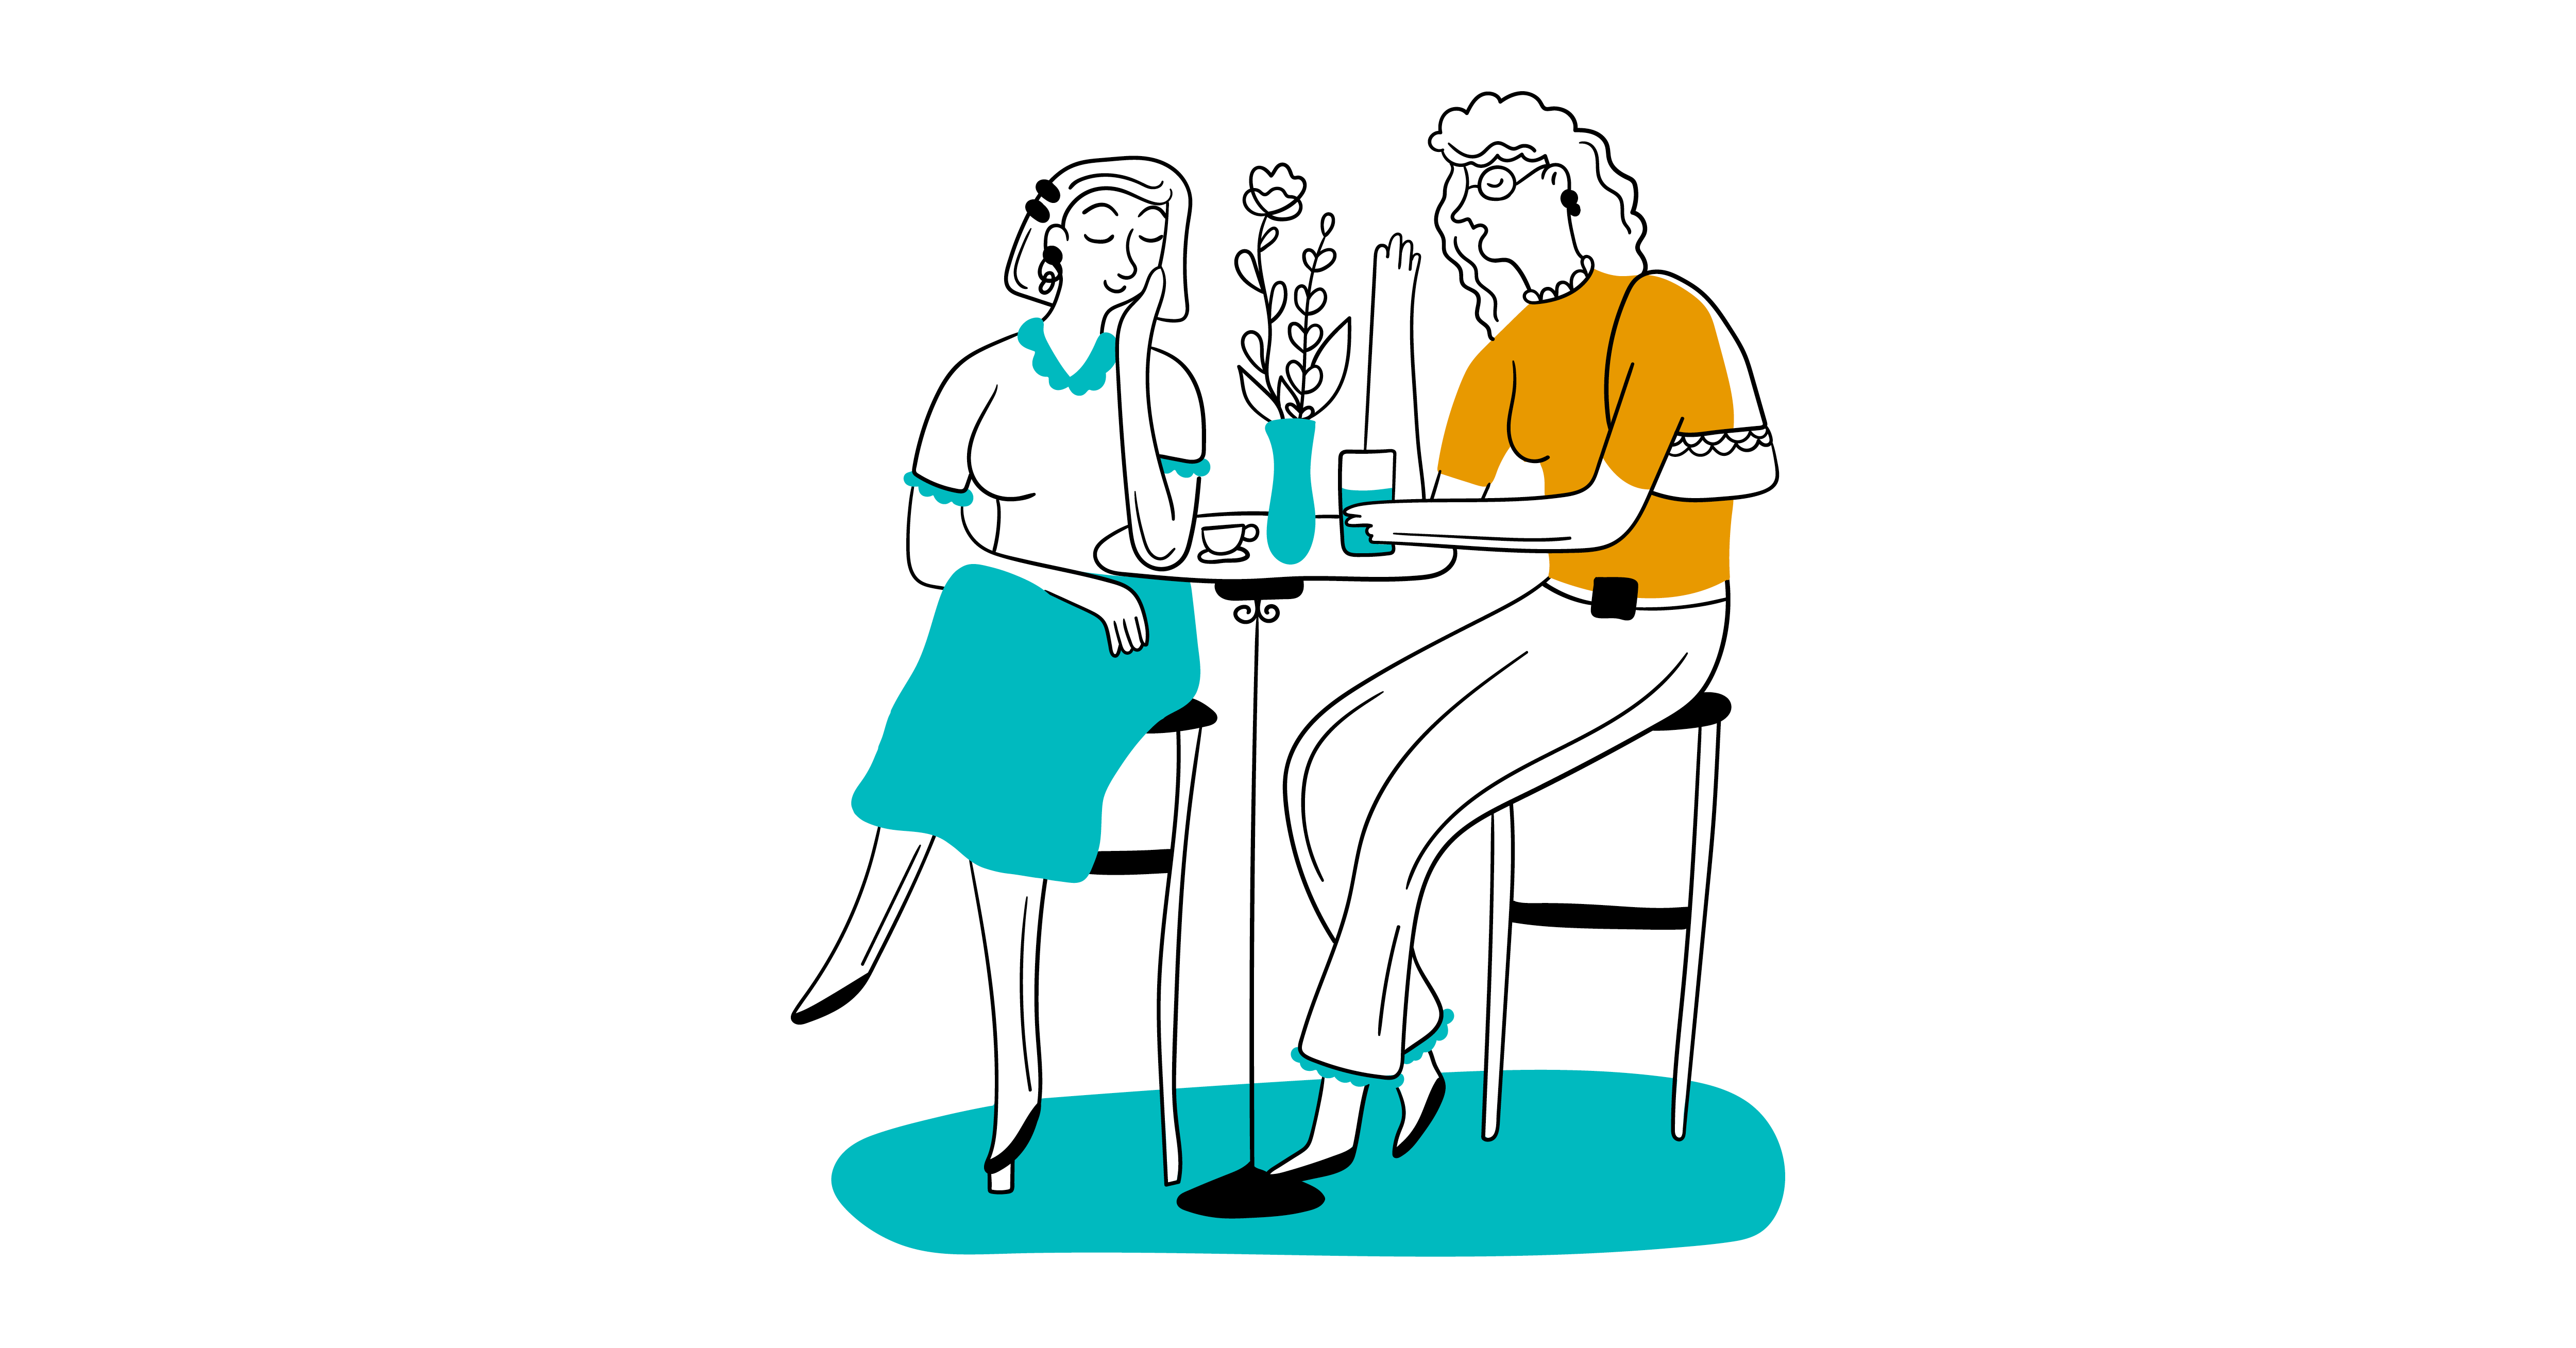 Illustration of two women having a friendly chat in a café